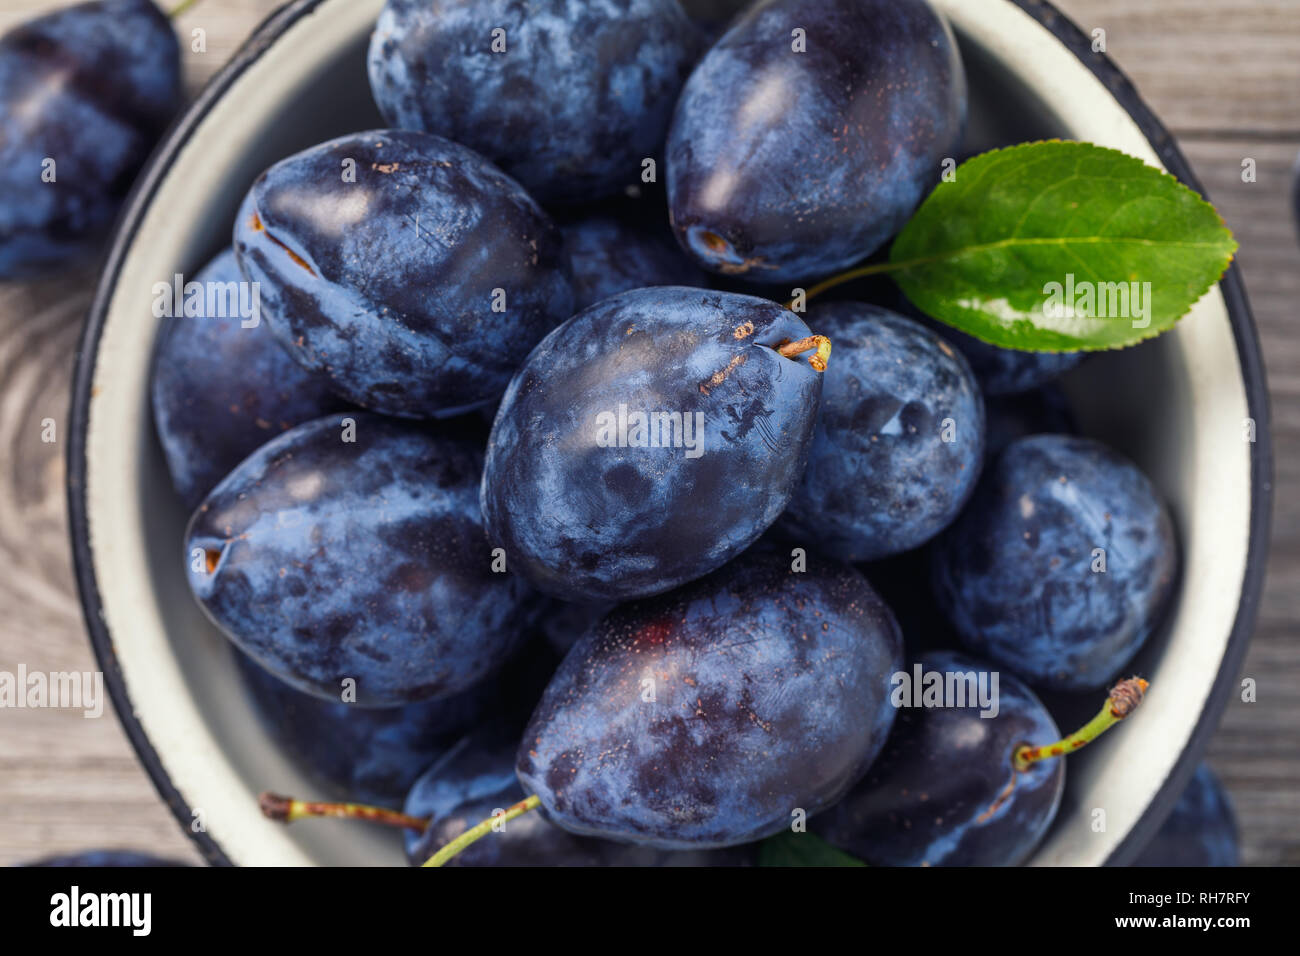 Top view of a bowl full of ripe prune fruit on a wooden table, close-up Stock Photo